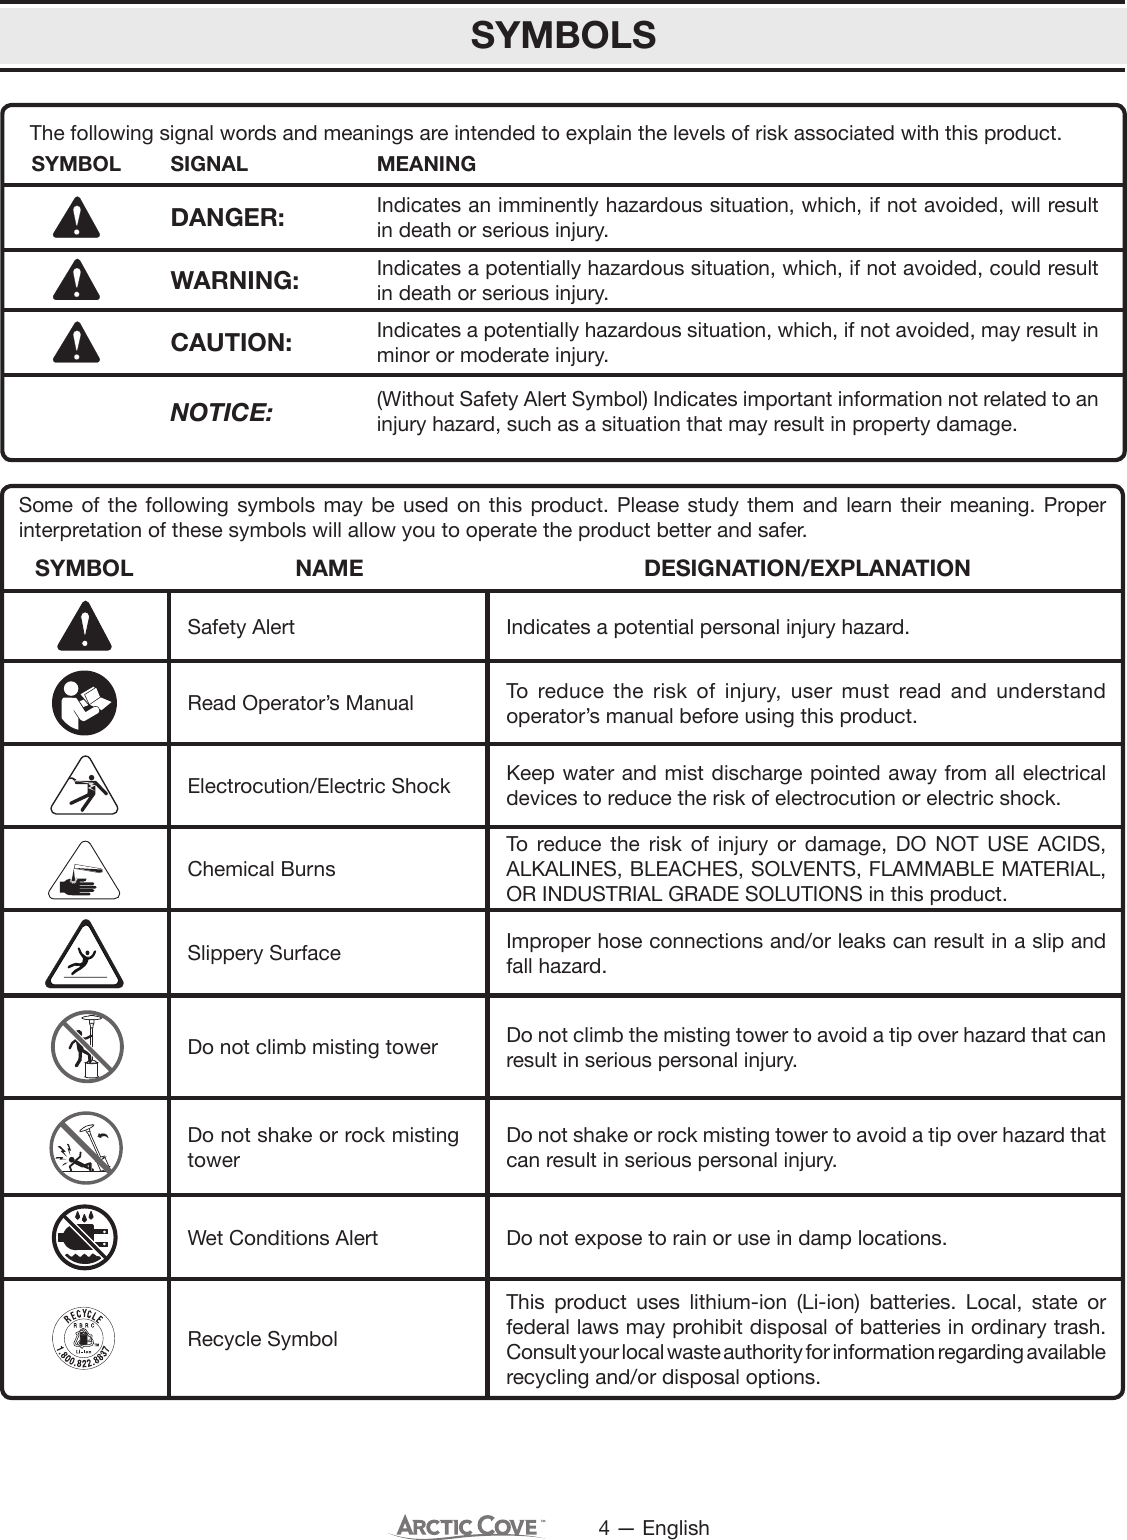 4 — EnglishSome of the following symbols may be used on this product. Please study them and learn their meaning. Proper interpretation of these symbols will allow you to operate the product better and safer.Safety Alert Indicates a potential personal injury hazard.Read Operator’s Manual To reduce the risk of injury, user must read and understand operator’s manual before using this product.Electrocution/Electric Shock Keep water and mist discharge pointed away from all electrical devices to reduce the risk of electrocution or electric shock.Chemical BurnsTo reduce the risk of injury or damage, DO NOT USE ACIDS, ALKALINES, BLEACHES, SOLVENTS, FLAMMABLE MATERIAL, OR INDUSTRIAL GRADE SOLUTIONS in this product.Slippery Surface Improper hose connections and/or leaks can result in a slip and fall hazard.Do not climb misting tower Do not climb the misting tower to avoid a tip over hazard that can result in serious personal injury.Do not shake or rock misting towerDo not shake or rock misting tower to avoid a tip over hazard that can result in serious personal injury.Wet Conditions Alert Do not expose to rain or use in damp locations.Recycle SymbolThis product uses lithium-ion (Li-ion) batteries. Local, state or federal laws may prohibit disposal of batteries in ordinary trash. Consult your local waste authority for information  regarding available recycling and/or disposal options.SYMBOL NAME DESIGNATION/EXPLANATIONThe following signal words and meanings are intended to explain the levels of risk associated with this product.SYMBOL SIGNAL MEANINGDANGER: Indicates an imminently hazardous situation, which, if not avoided, will result in death or serious injury.WARNING: Indicates a potentially hazardous situation, which, if not avoided, could result in death or serious injury.CAUTION: Indicates a potentially hazardous situation, which, if not avoided, may result in minor or moderate injury. NOTICE: (Without Safety Alert Symbol) Indicates important information not related to an injury hazard, such as a situation that may result in property damage.SYMBOLS